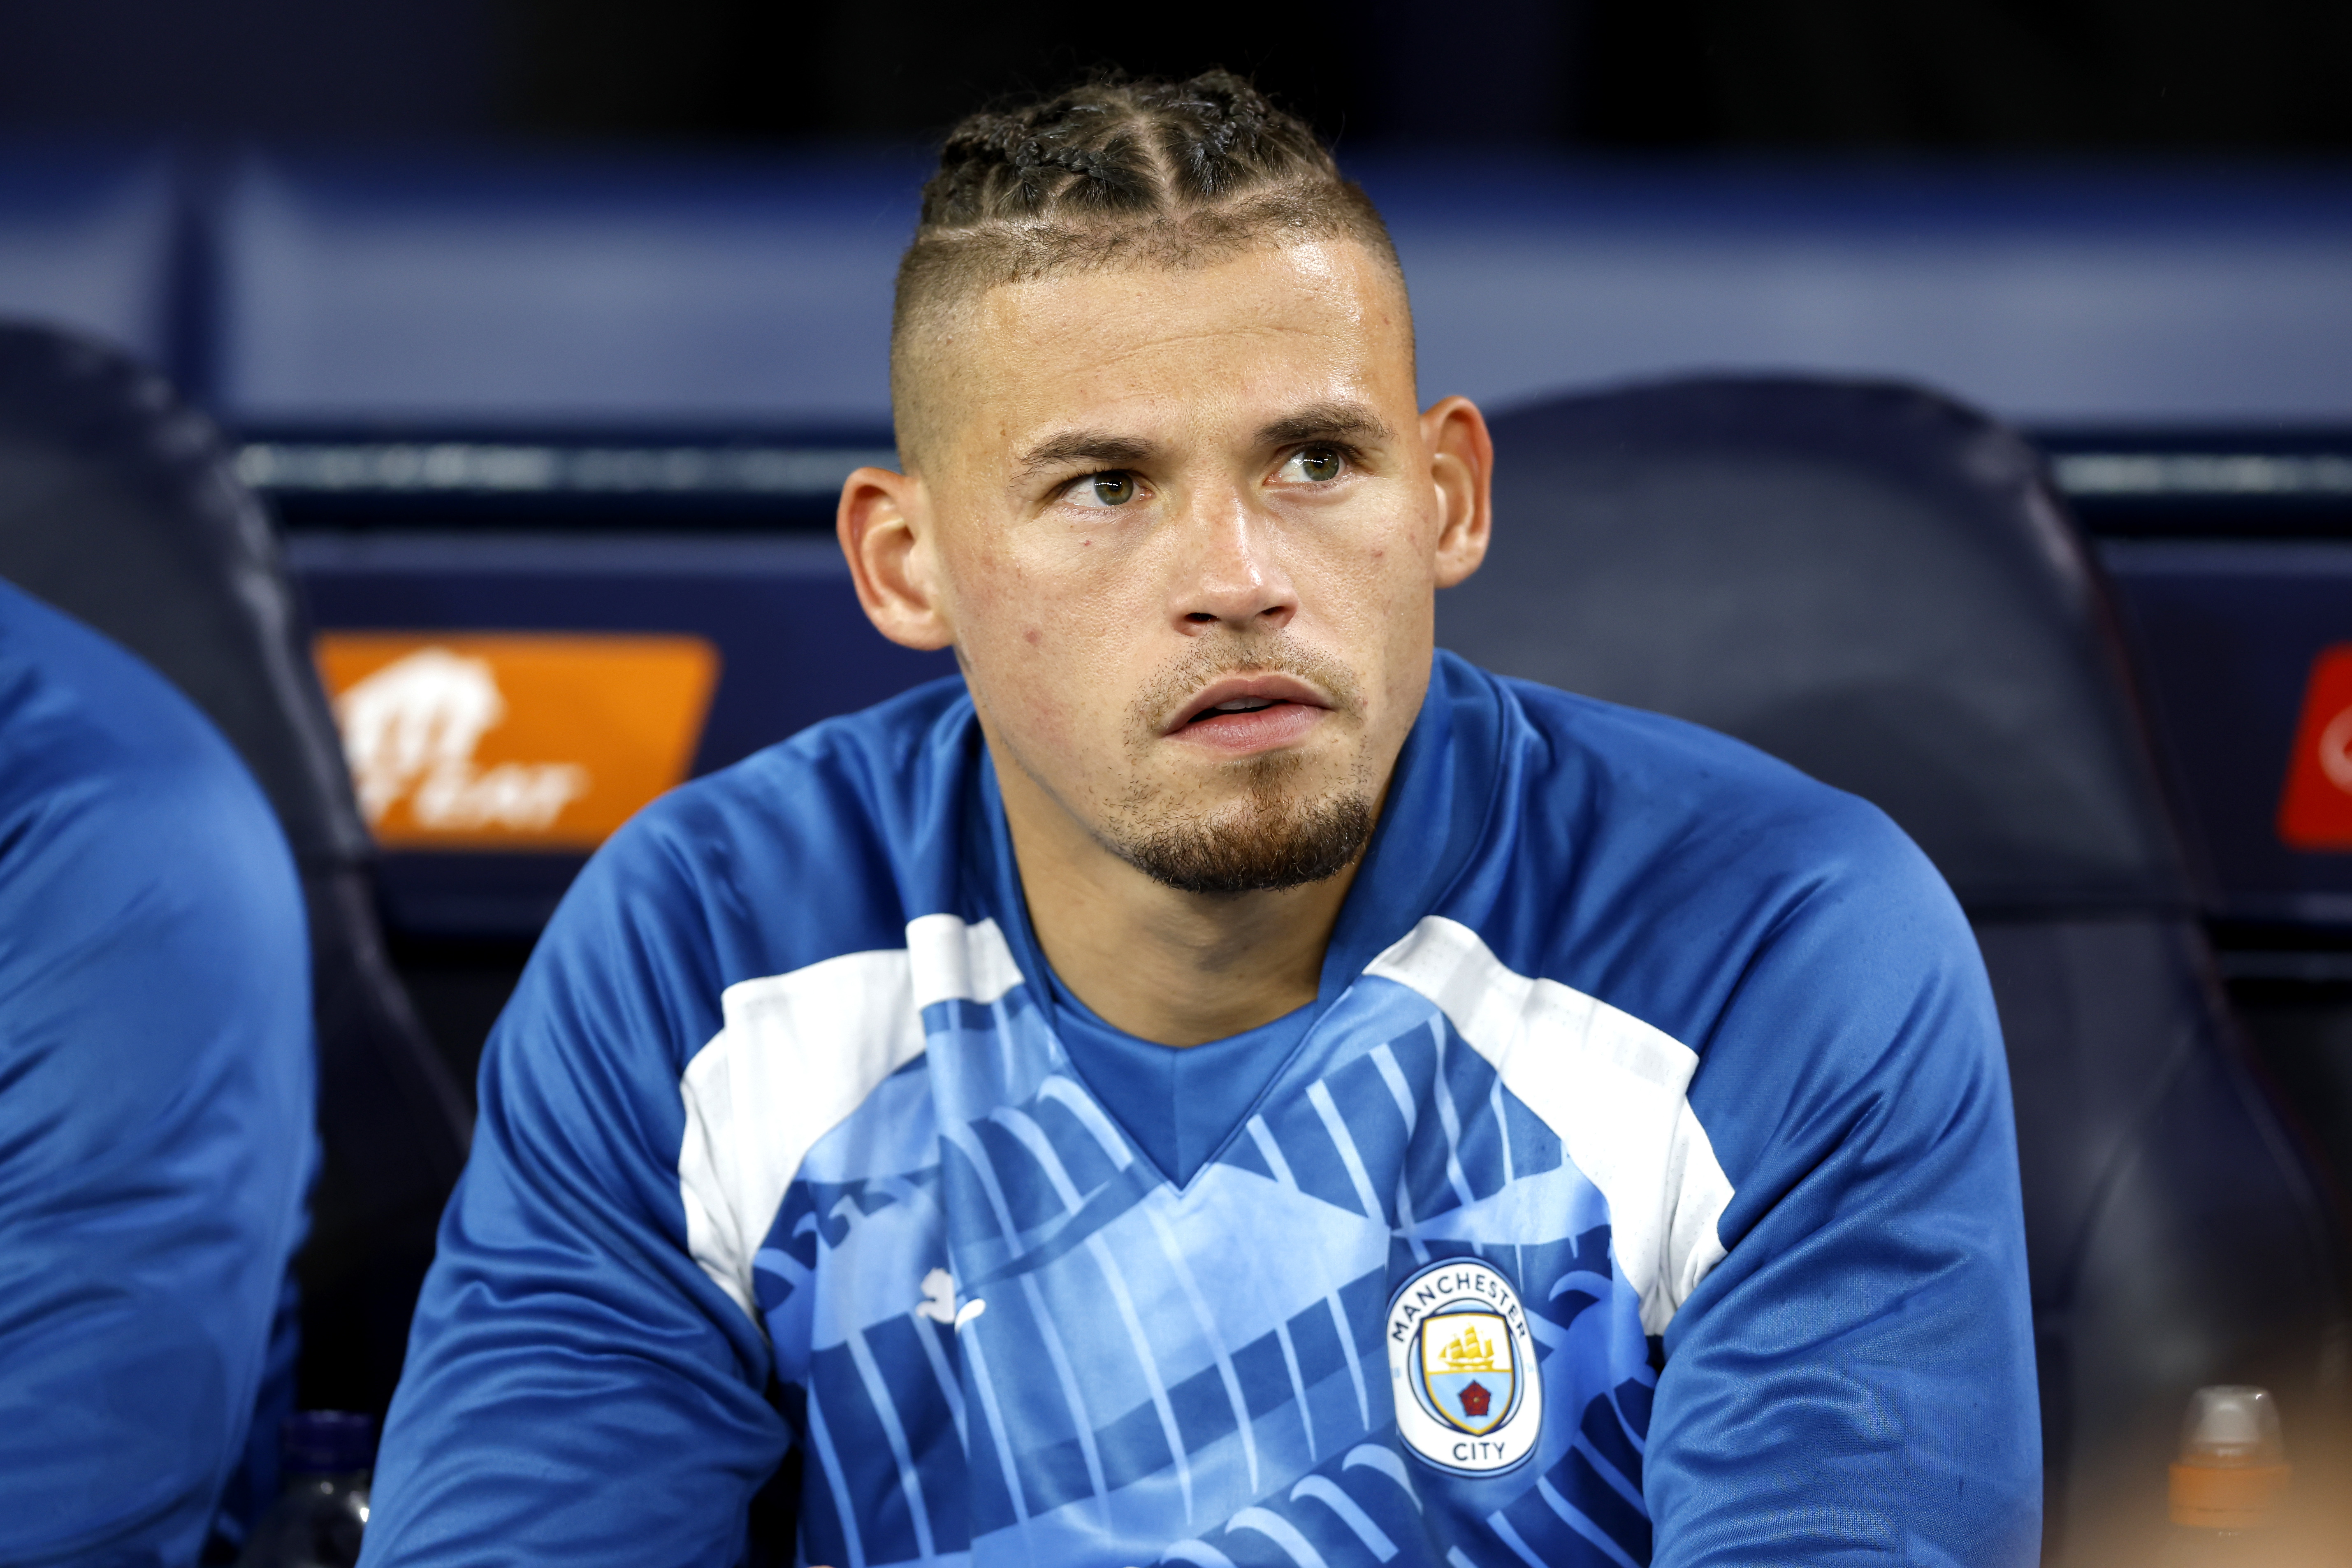 Kalvin Phillips sits on the bench